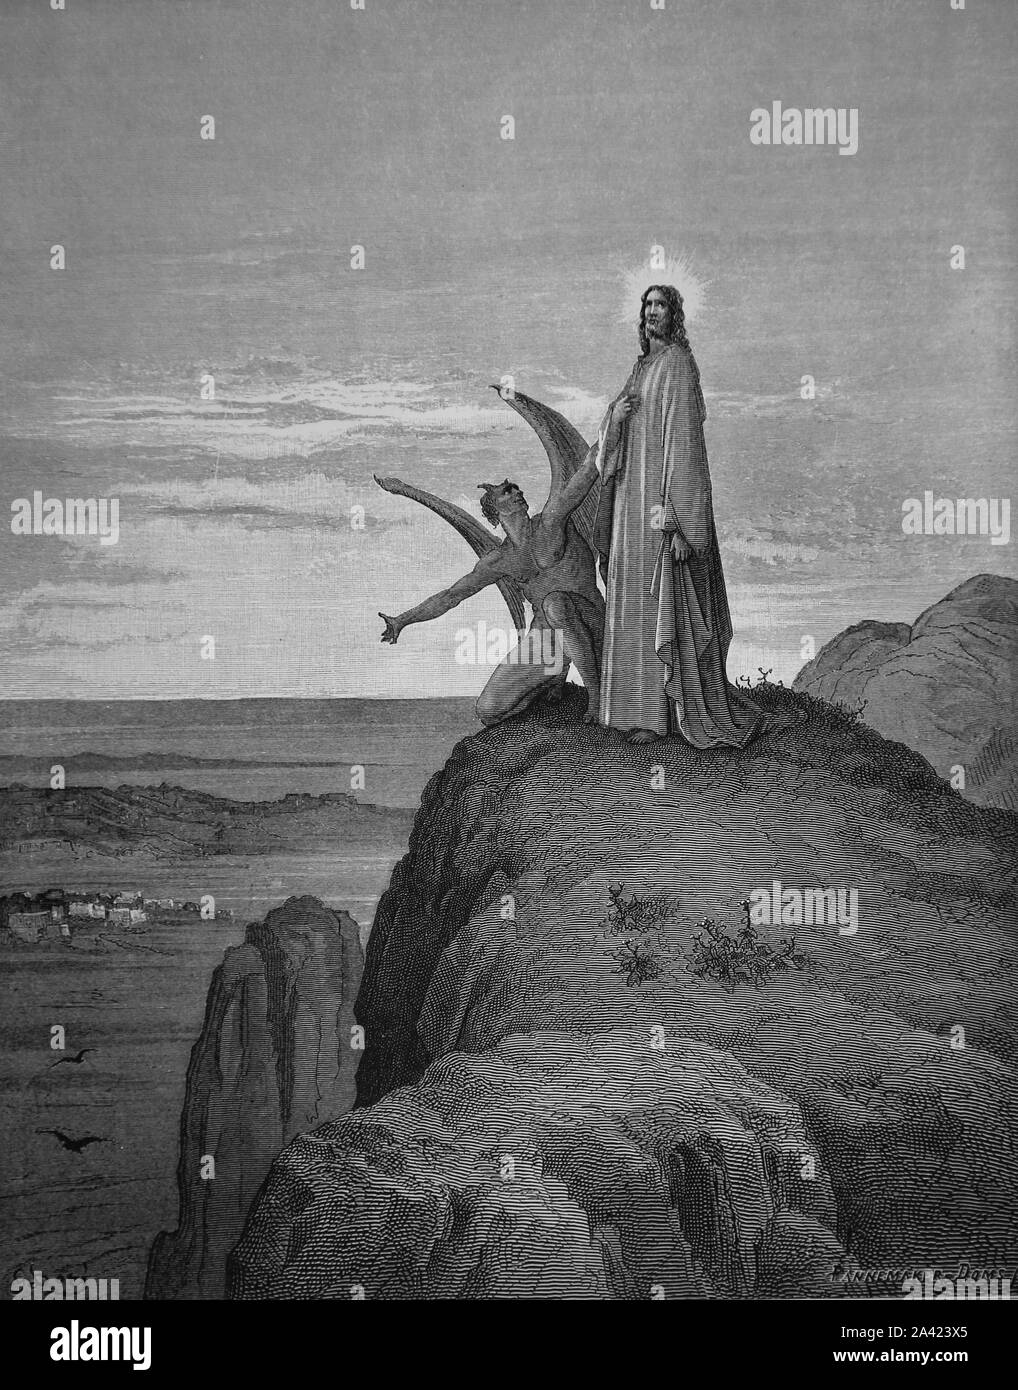 Temptation of Christ. Mountain. Engraving. Bible Illustration by Gustave Dore. 19th century. Stock Photo